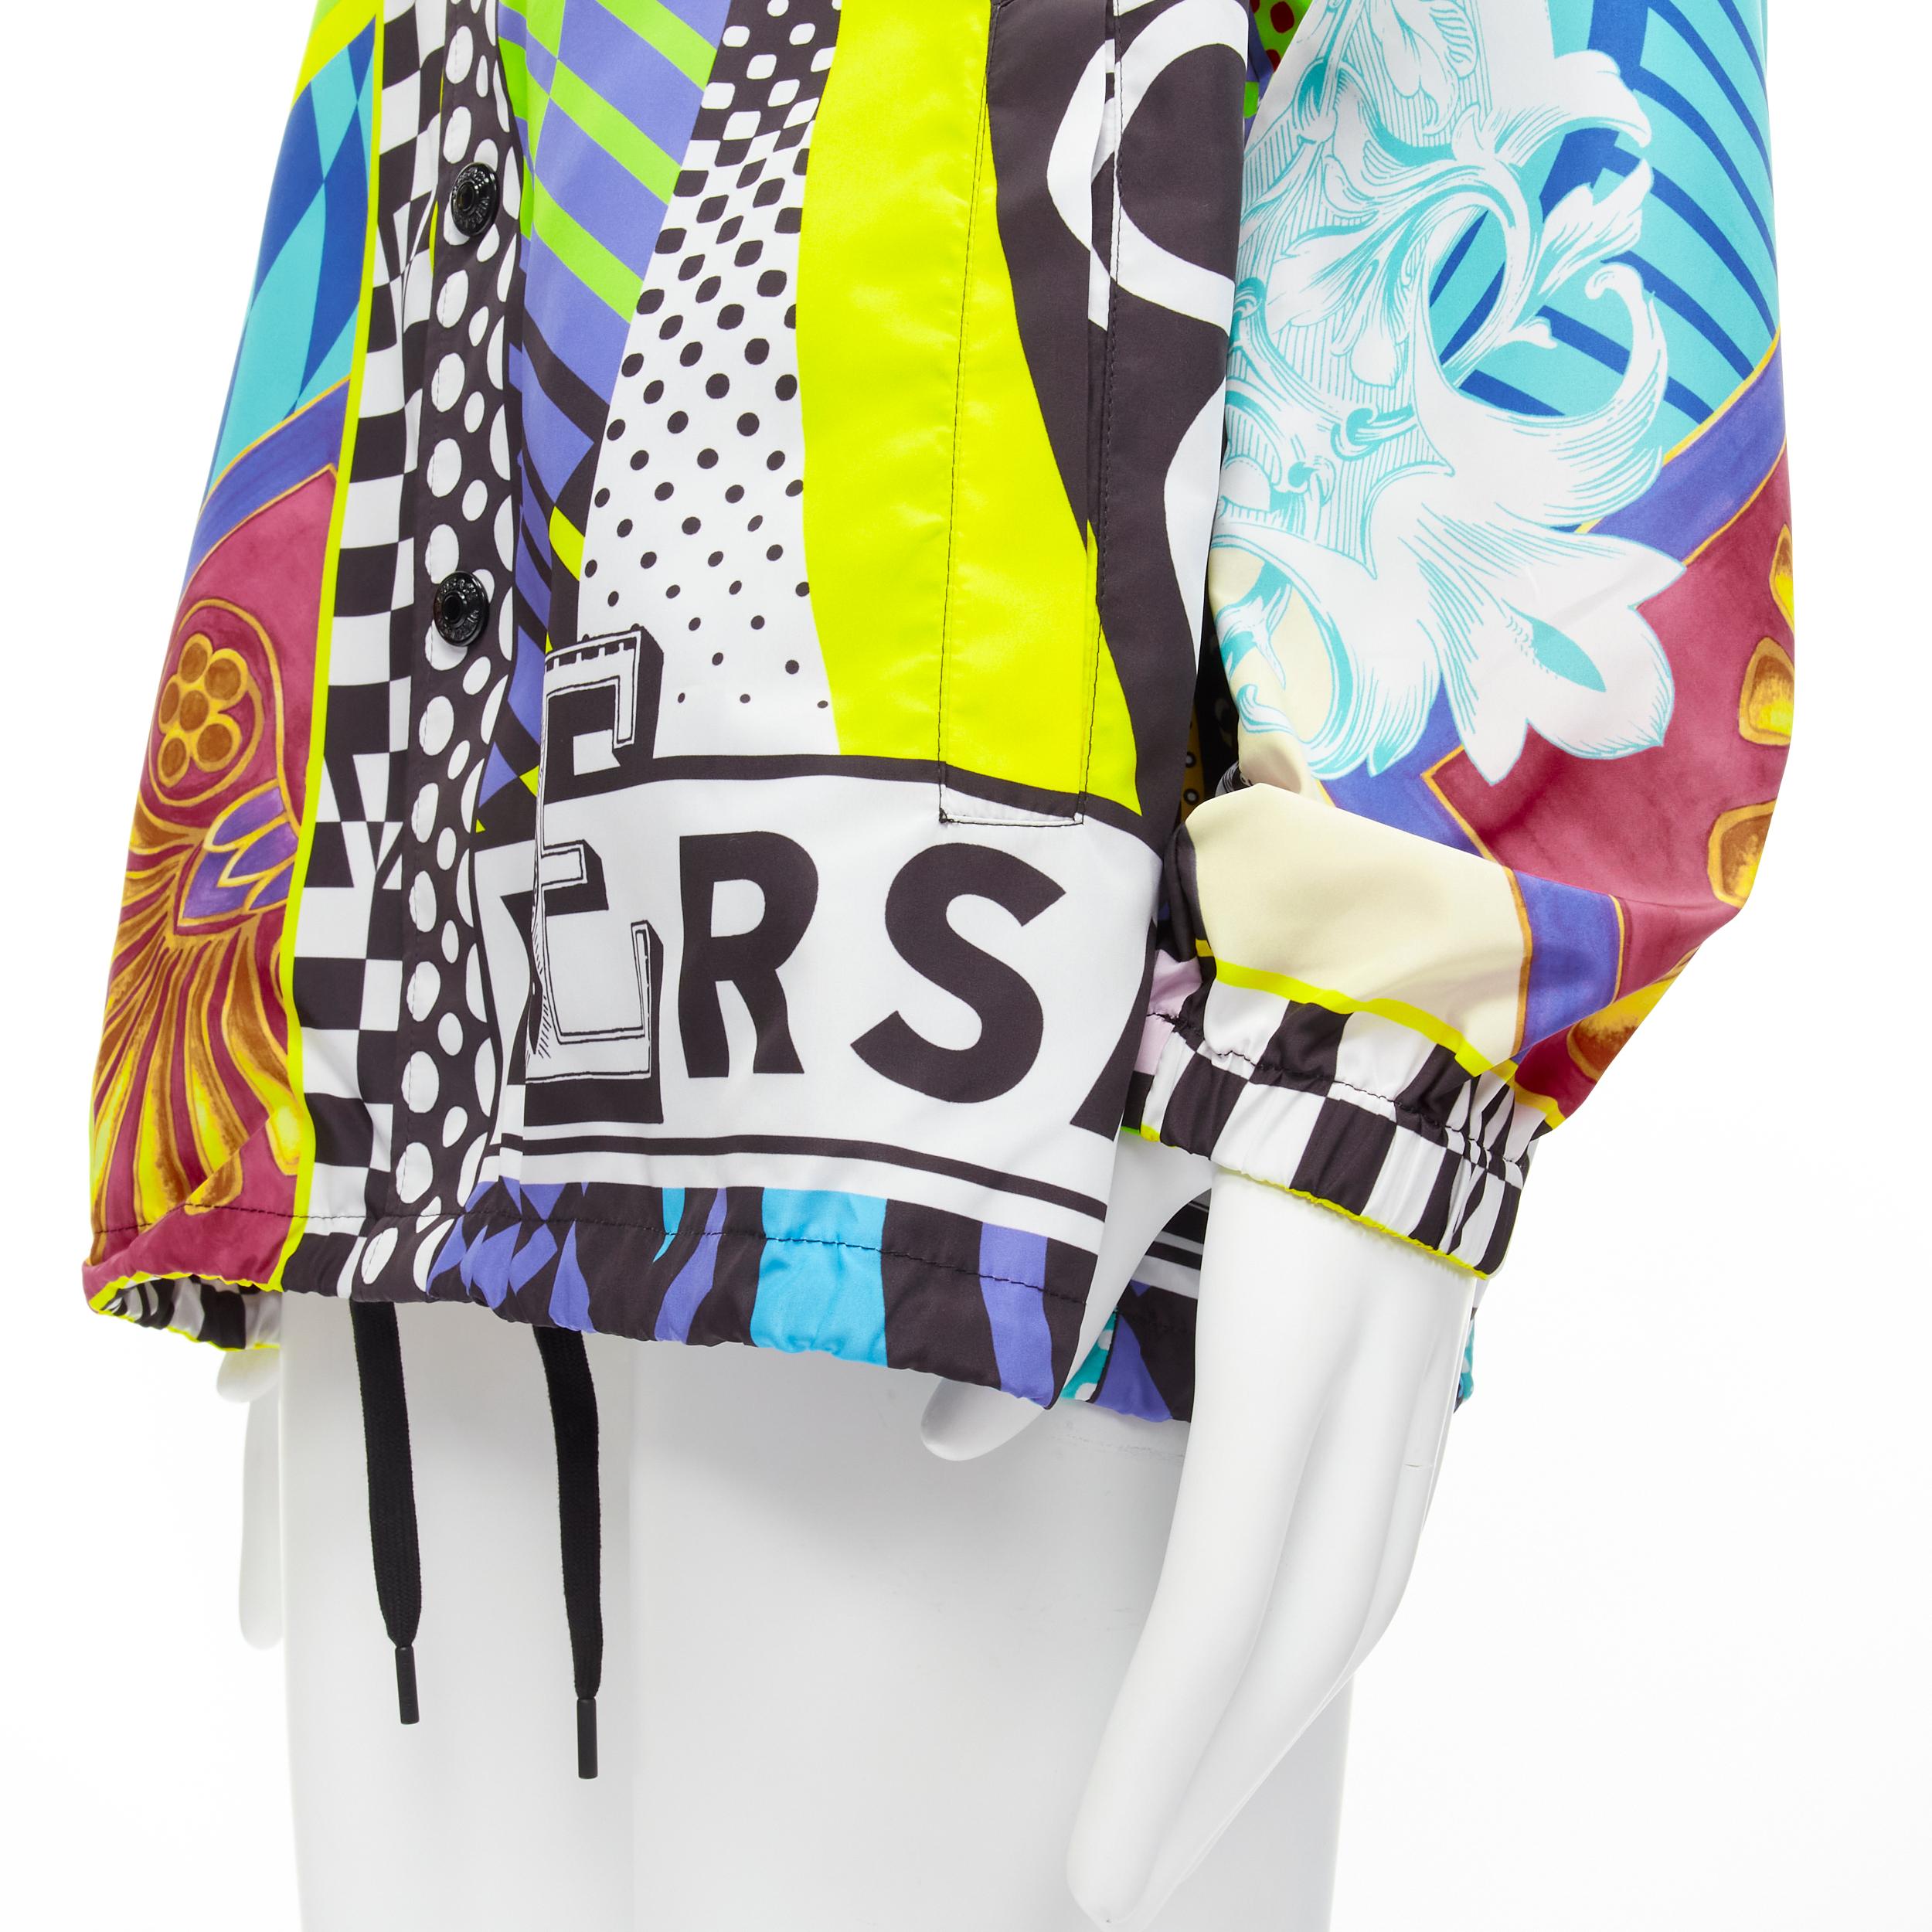 new VERSACE 2020 Runway Pop Temple nylon windbreaker over shirt jacket IT48 M
Reference: TGAS/C00011
Brand: Versace
Designer: Donatella Versace
Collection: Pop Temple Runway
Material: Nylon
Color: Multicolor
Pattern: Abstract
Closure: Button
Extra